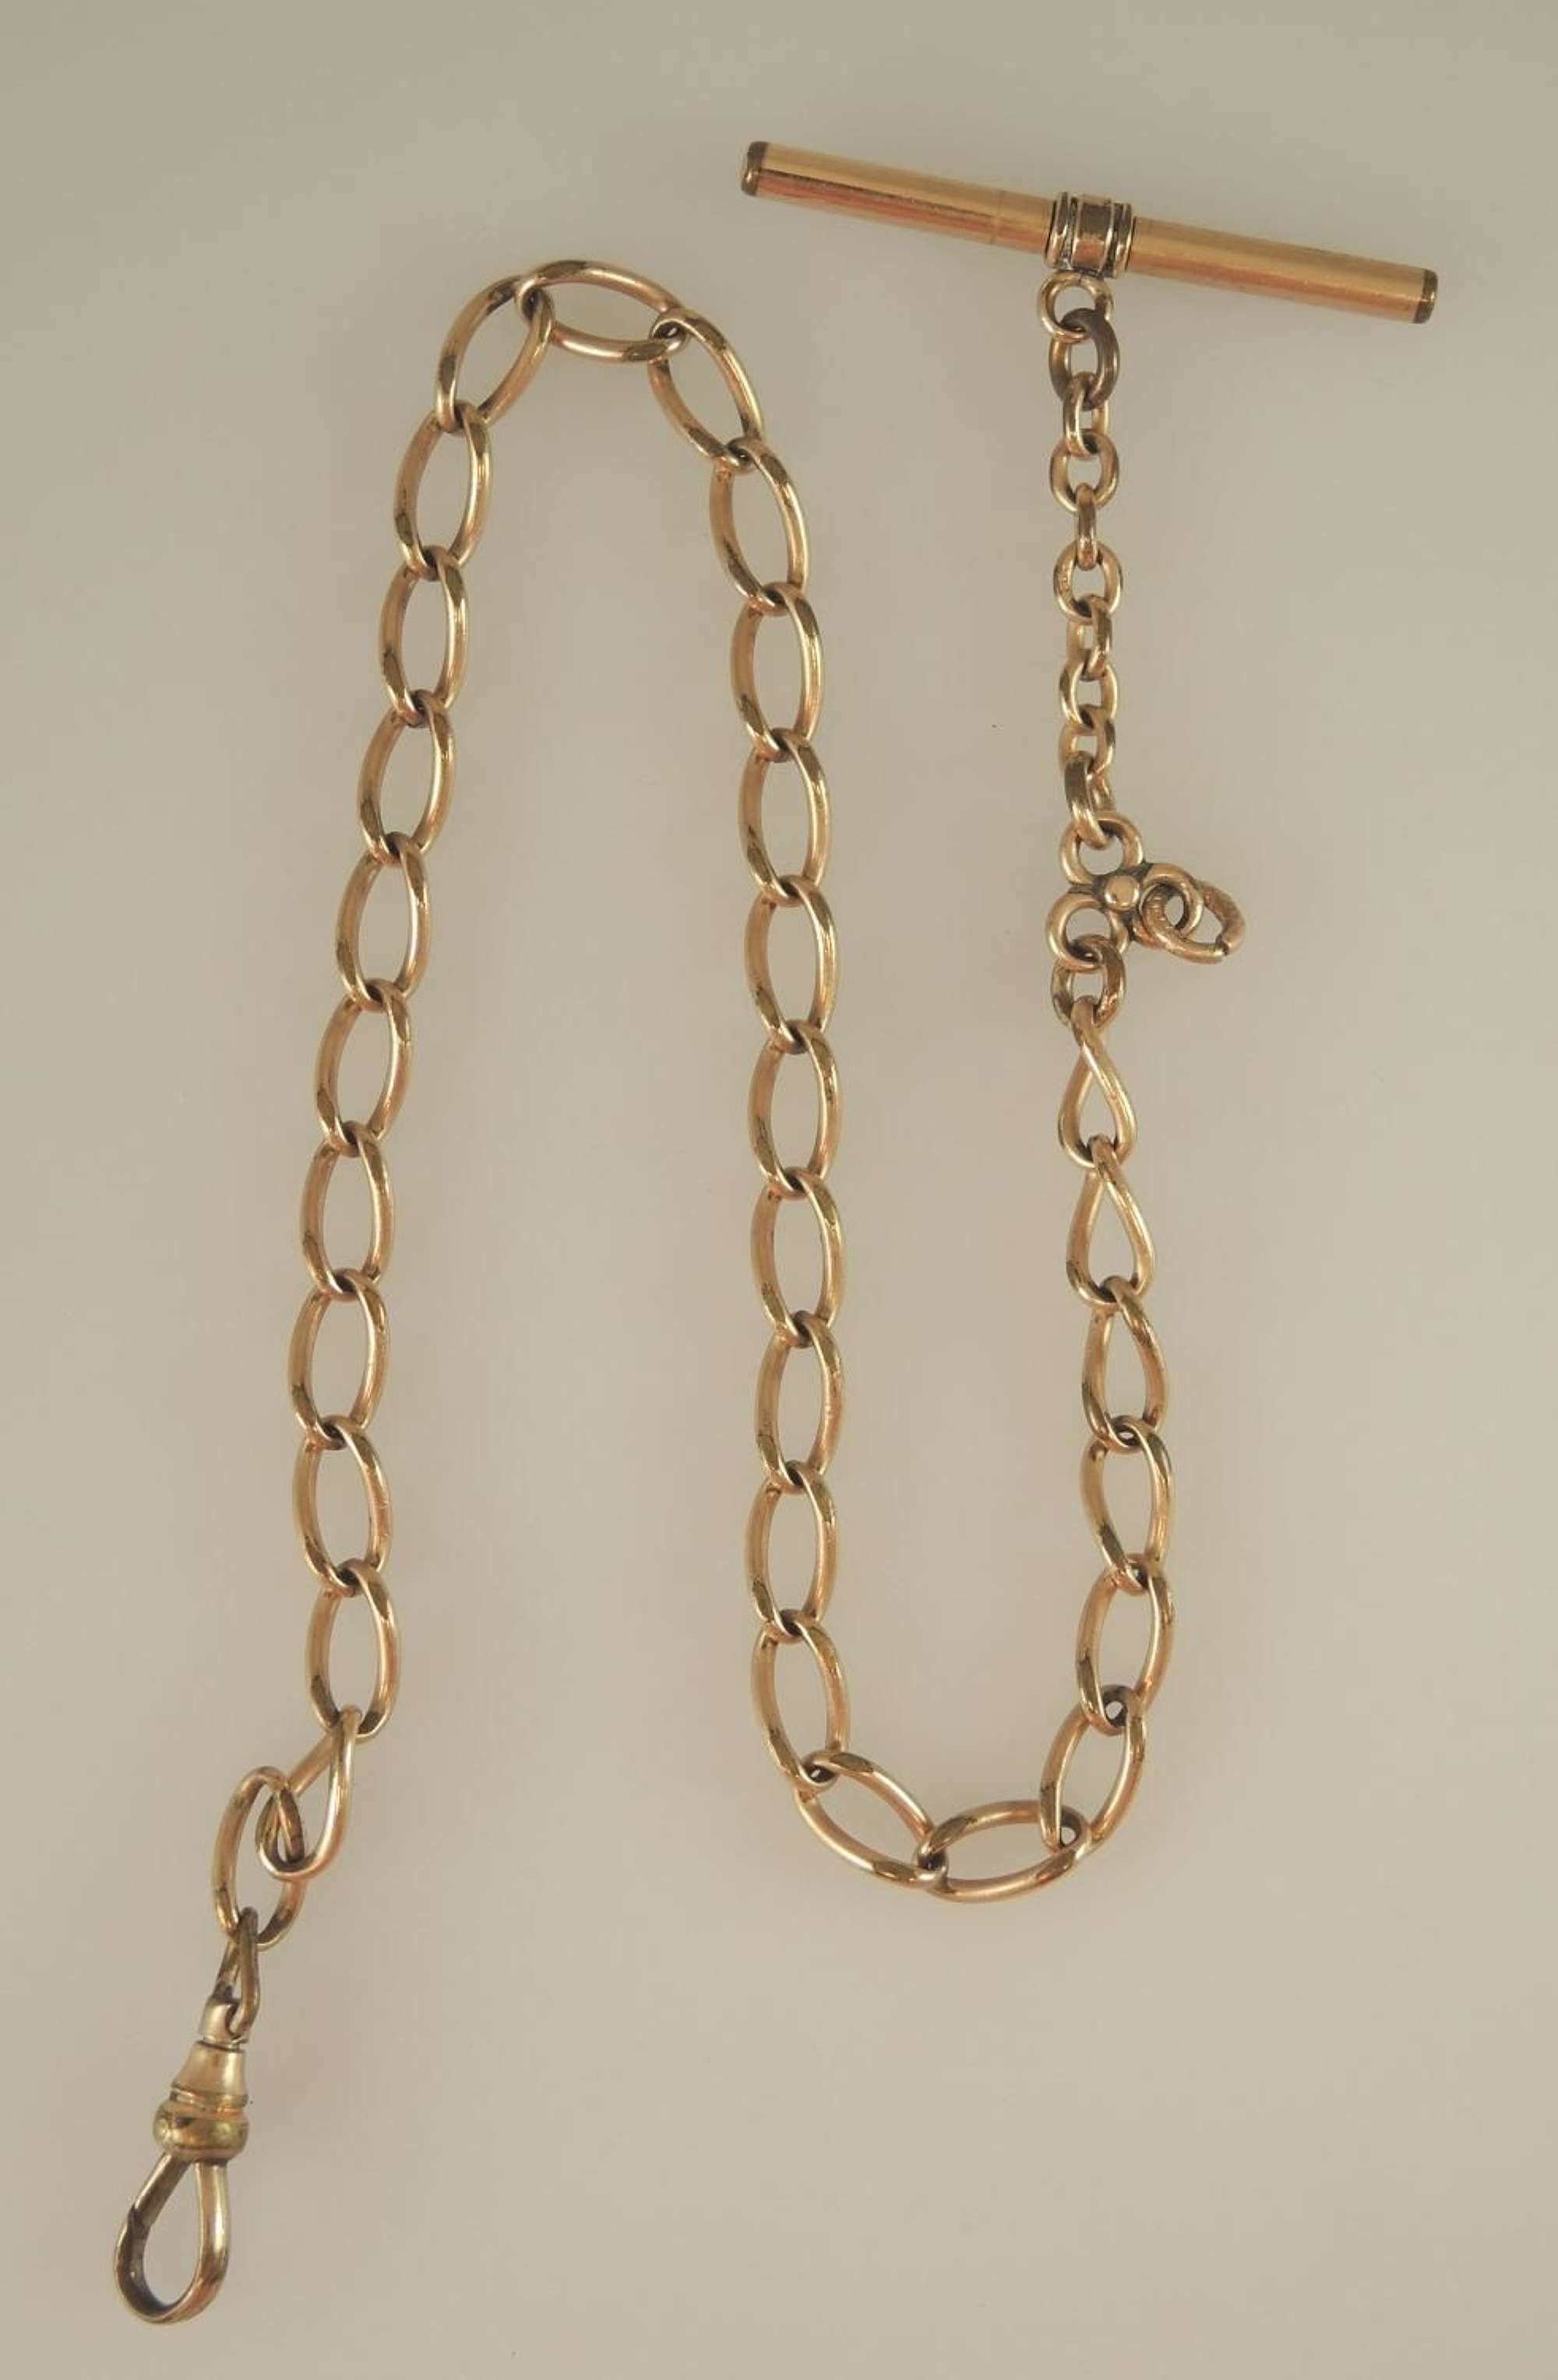 Rose gold plated watch chain c1890